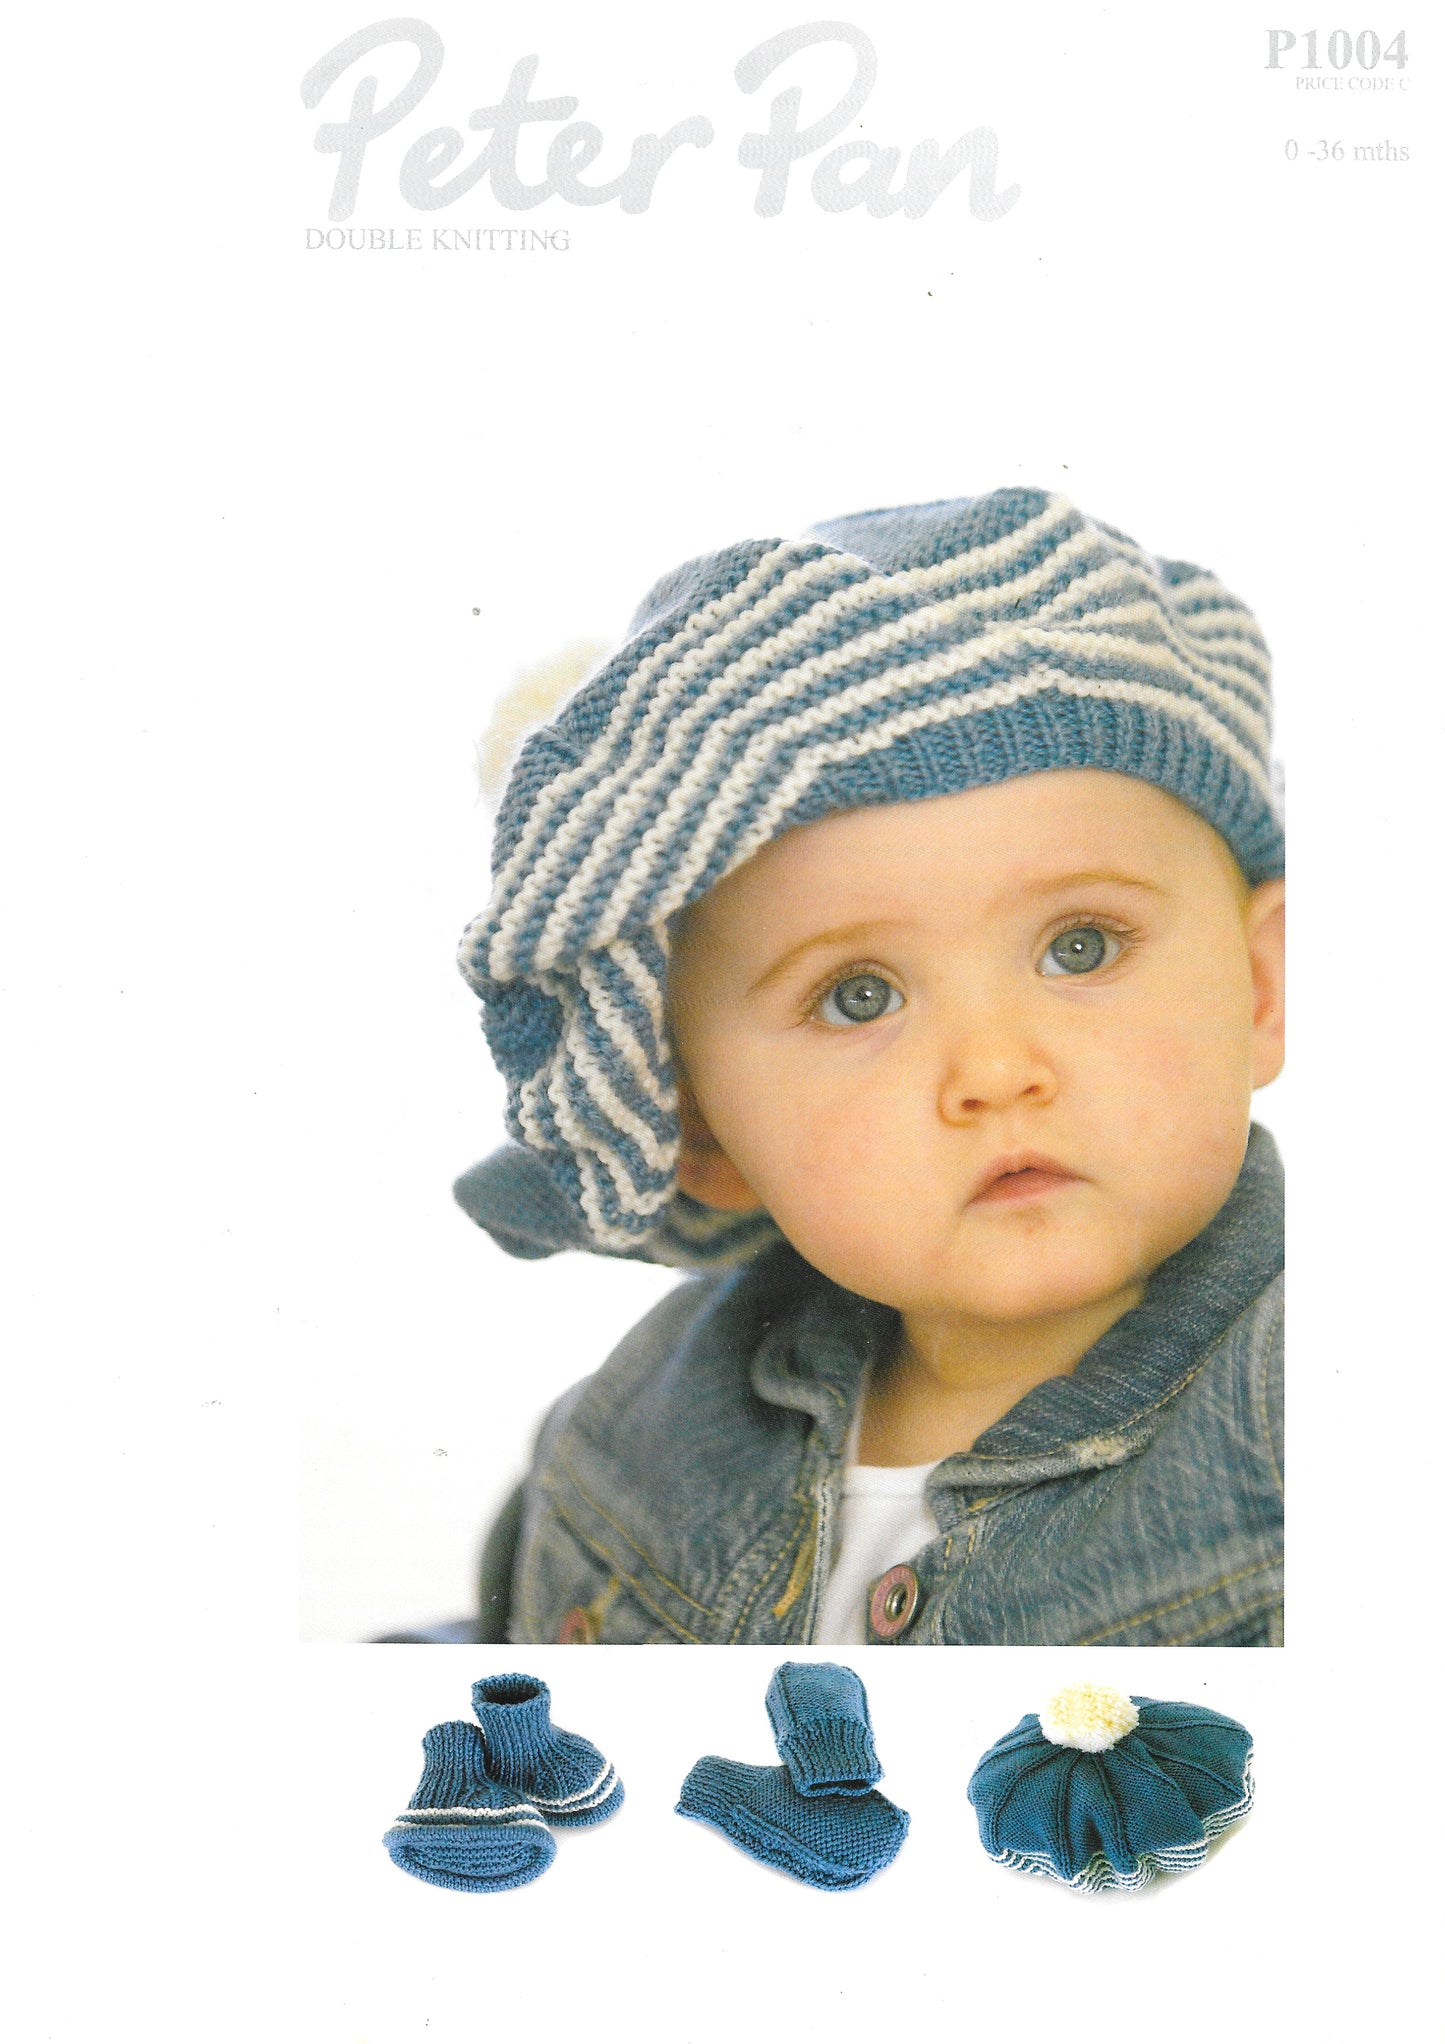 PRELOVED Peter Pan Knitting Pattern P1004. Child's hat, bootees and mitts. Double Knit.